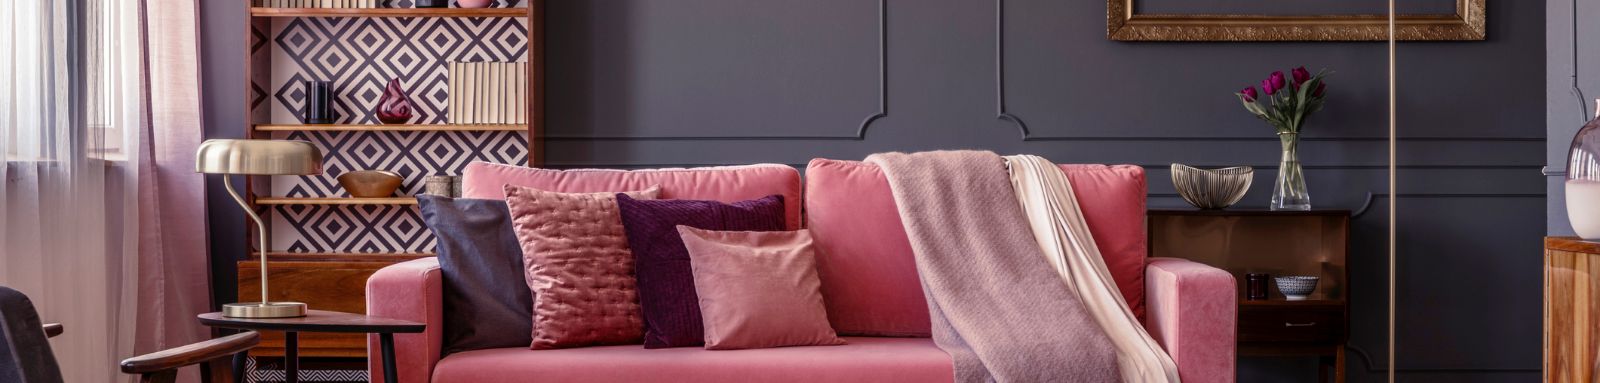 Pink couch in lounge room